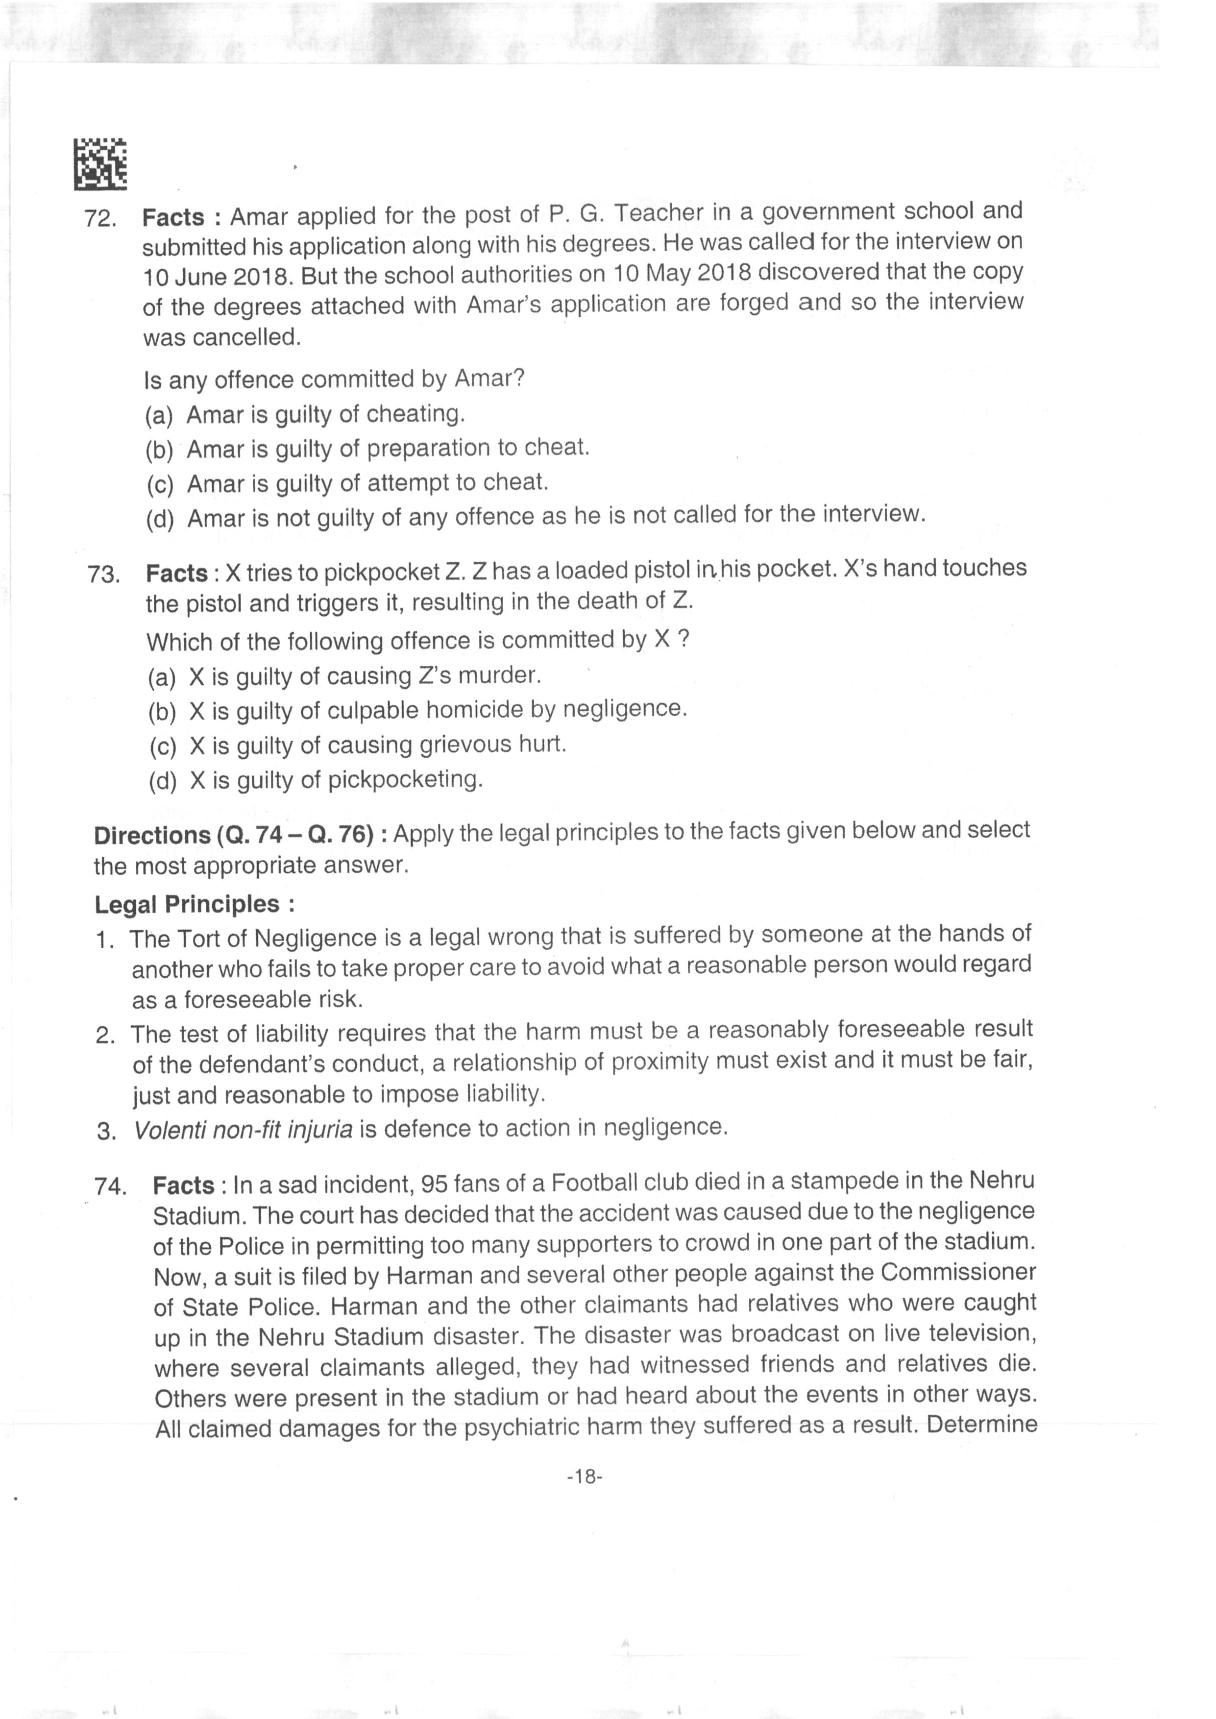 AILET 2019 Question Paper for BA LLB - Page 18